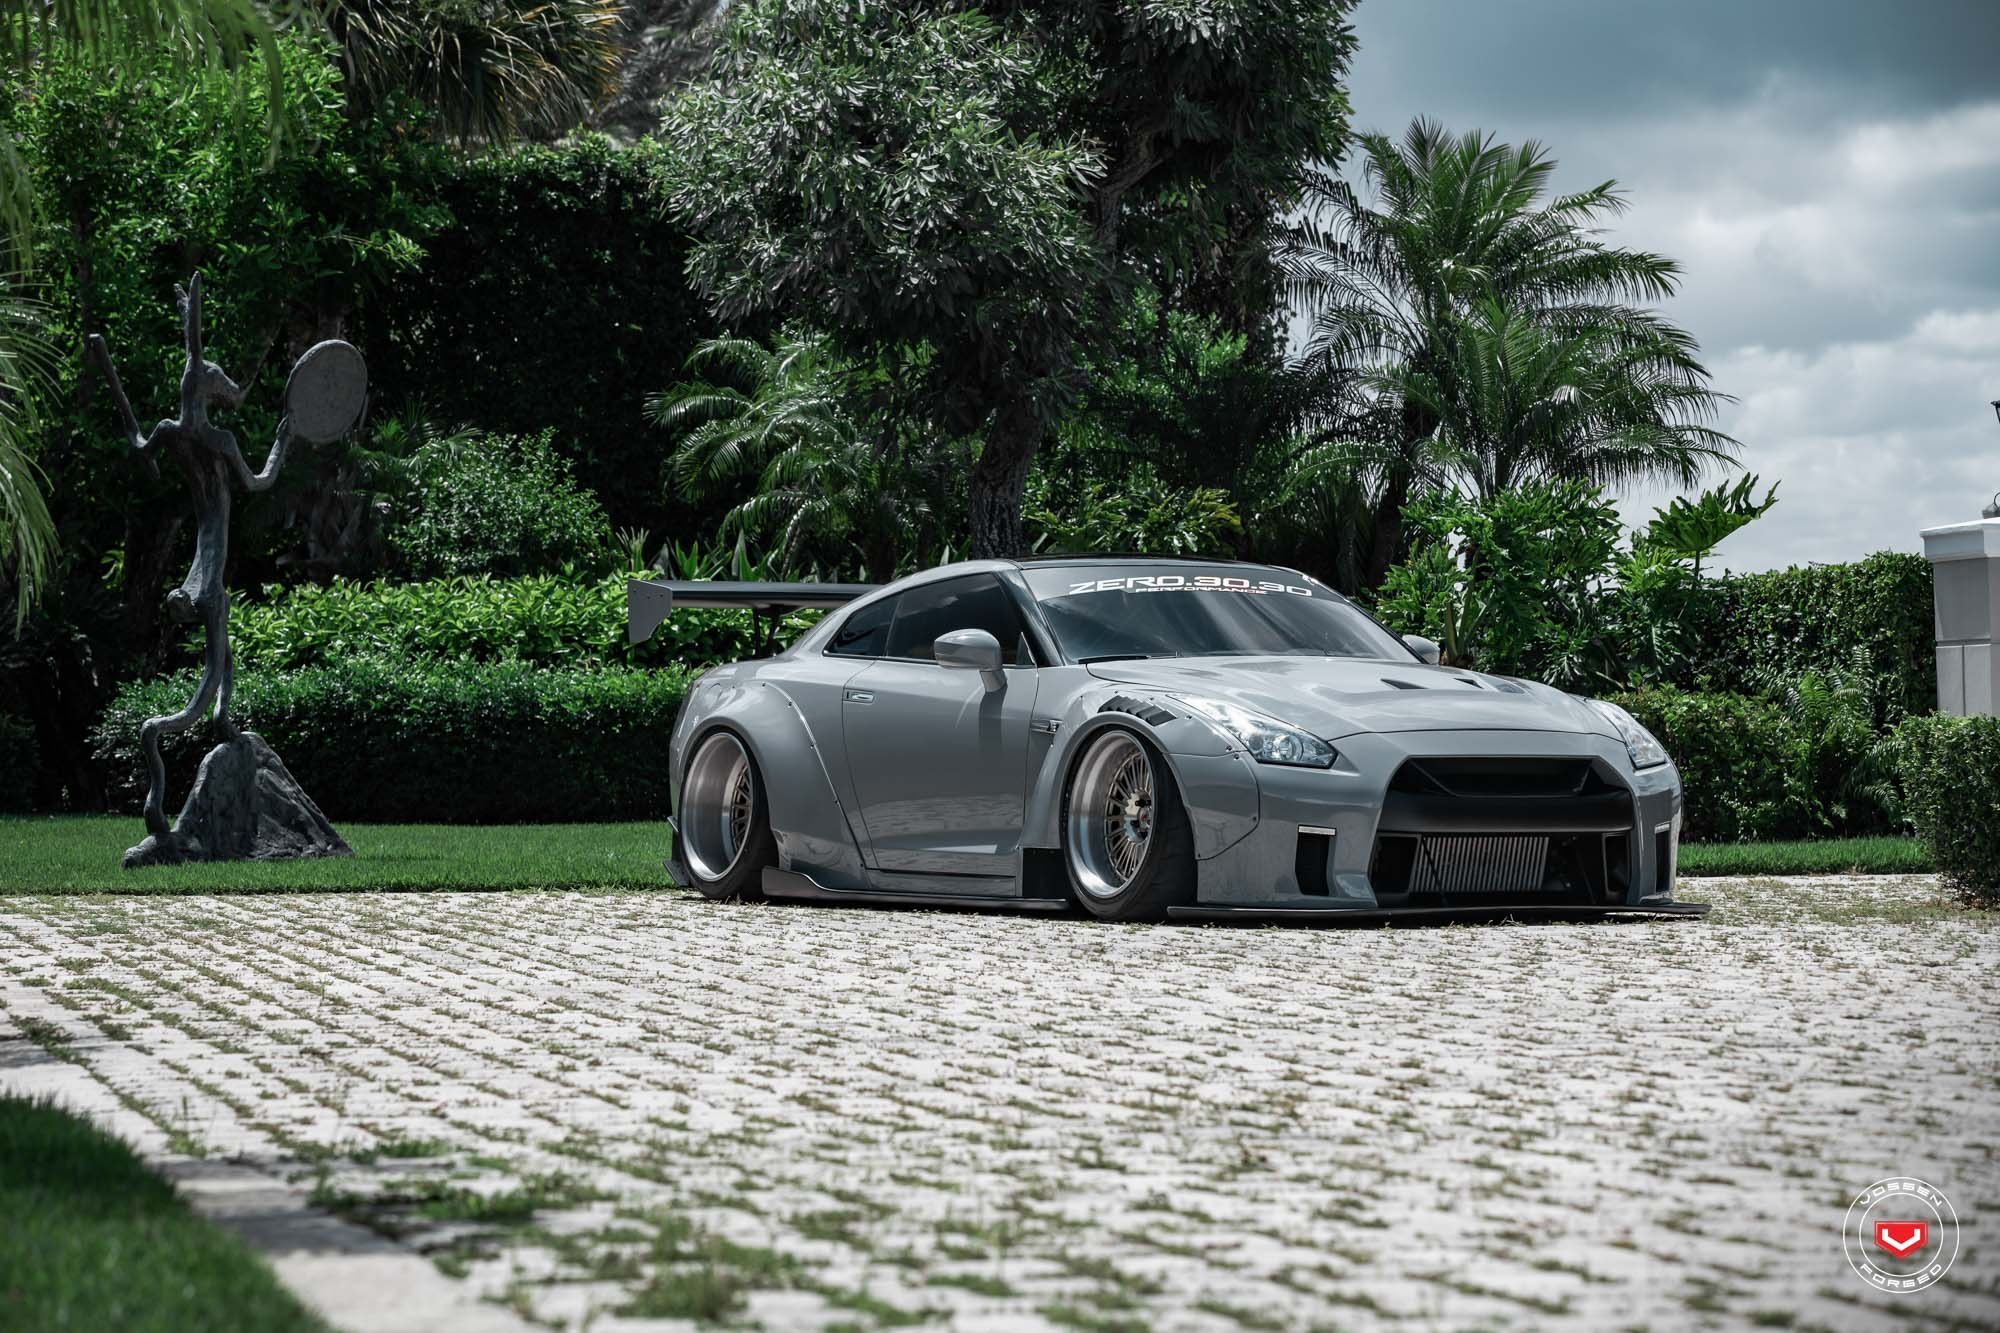 Aftermarket Vented Hood on Gray Nissan GT-R - Photo by Vossen Wheels